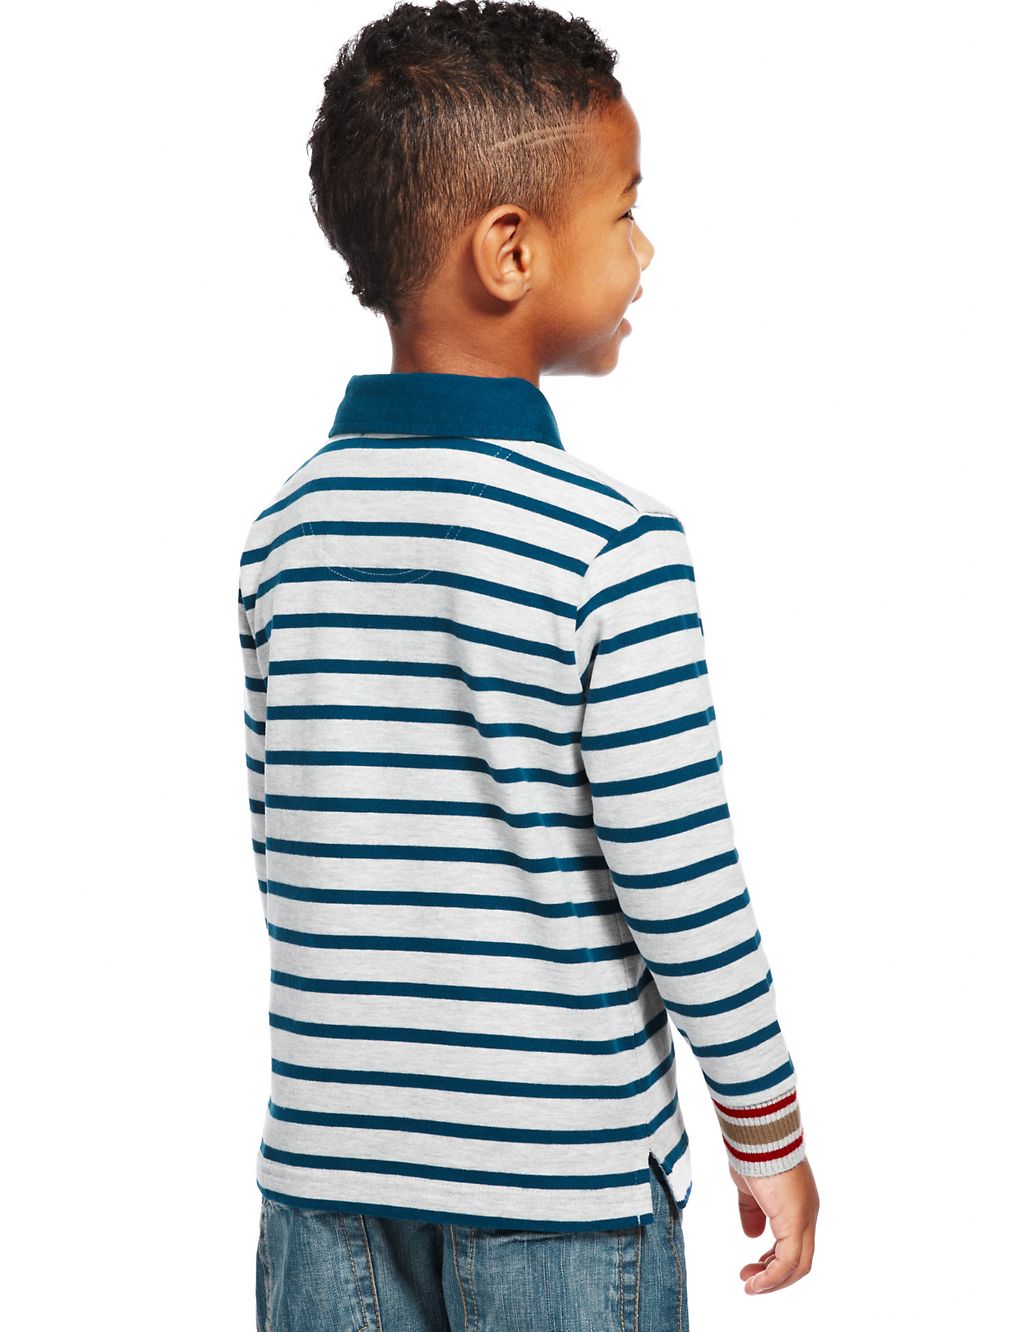 Cotton Rich Multi-Striped Rugby Top 4 of 5